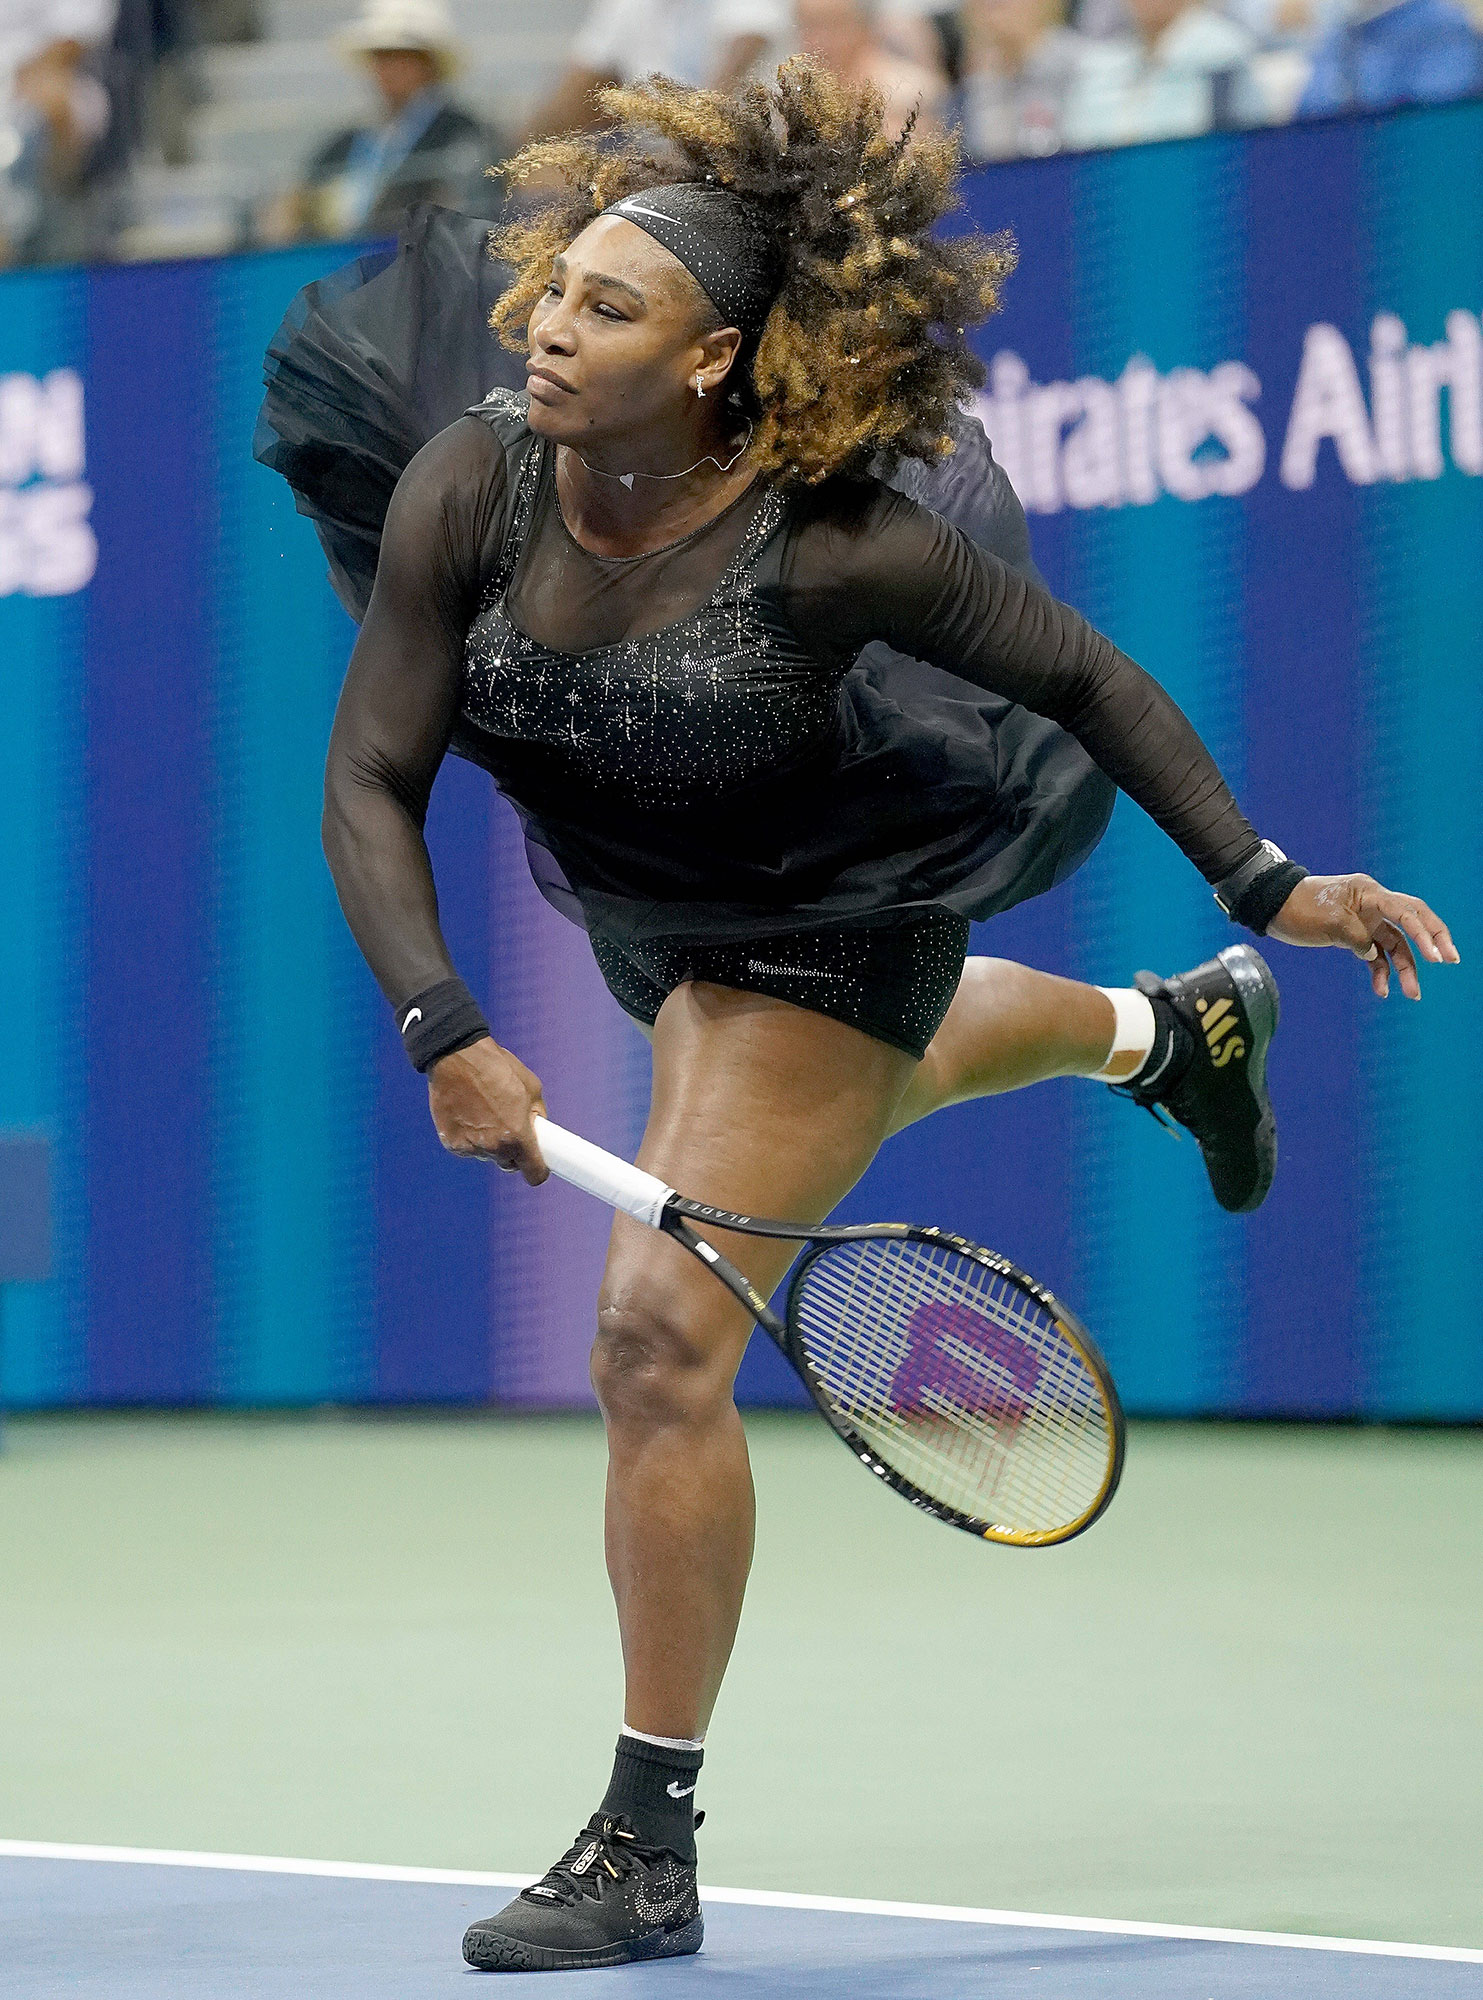 Serena Williams Best On-Court Tennis Fashion Moments Pics